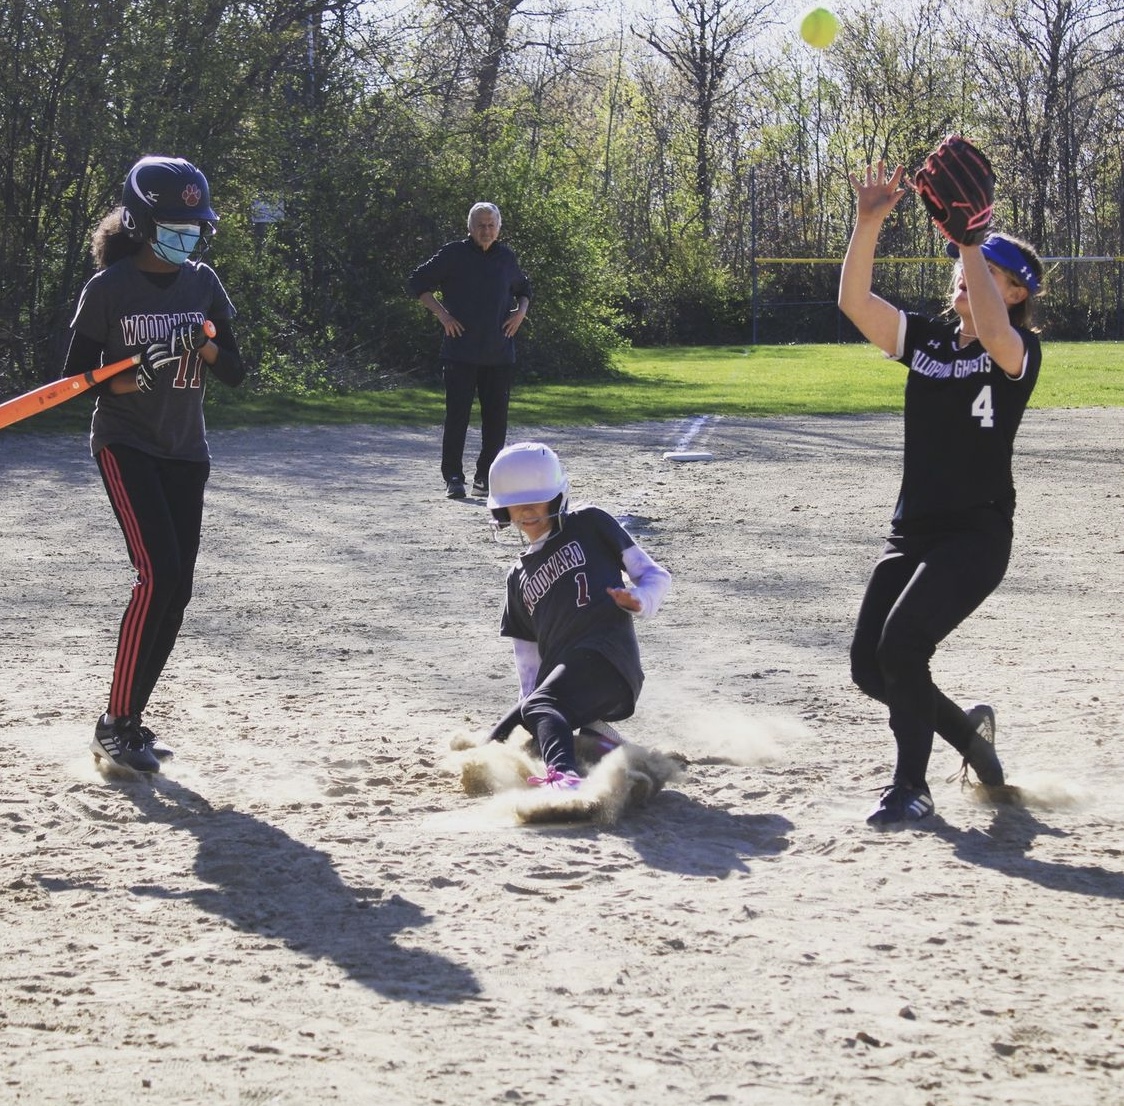 picture of a softball player sliding onto base while another player watches a third player catch the ball